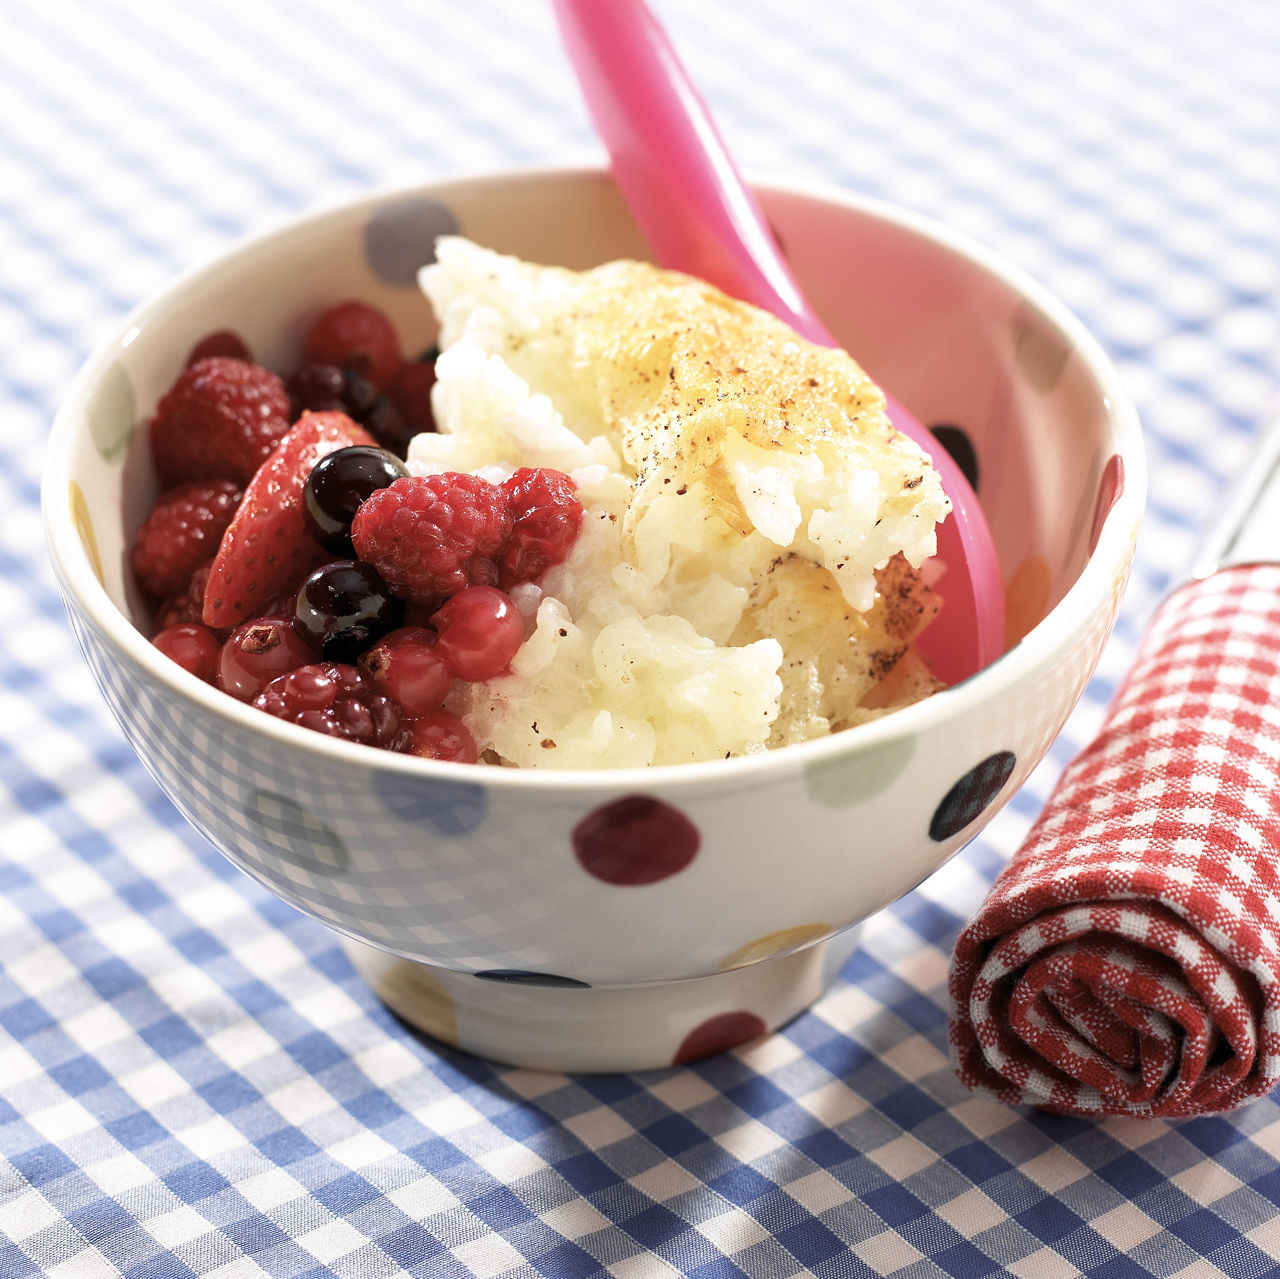 Rice pudding with fruit topping image to accompany recipe